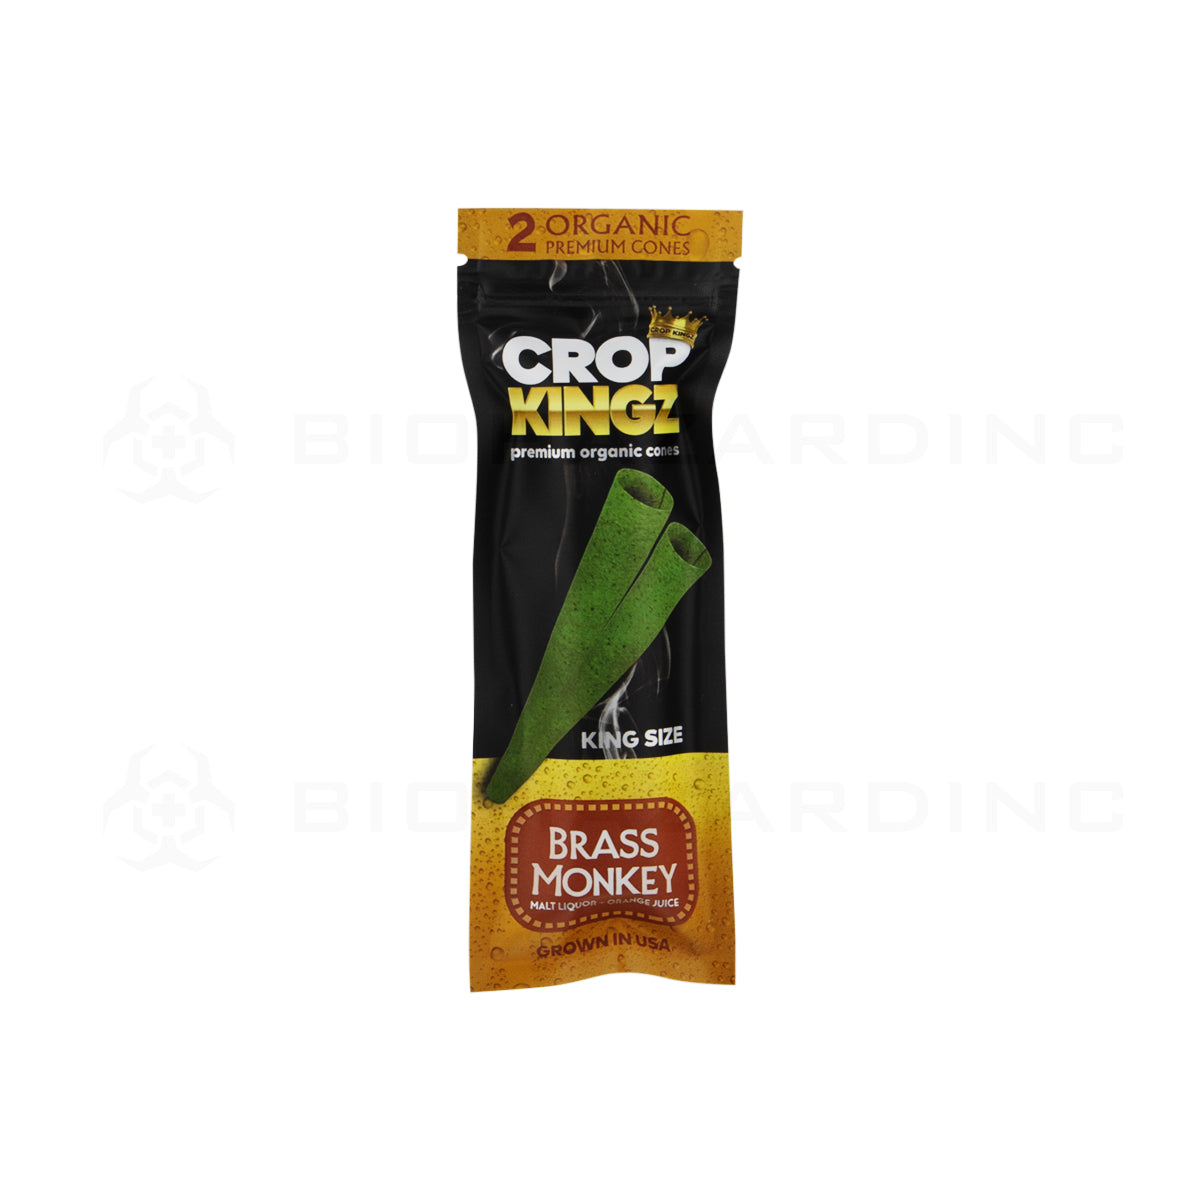 Crop Kingz | Organic Premium Pre-Rolled Cones King Size | 110mm - 10 Count - Various Flavors Pre-Rolled Cones Crop Kingz   